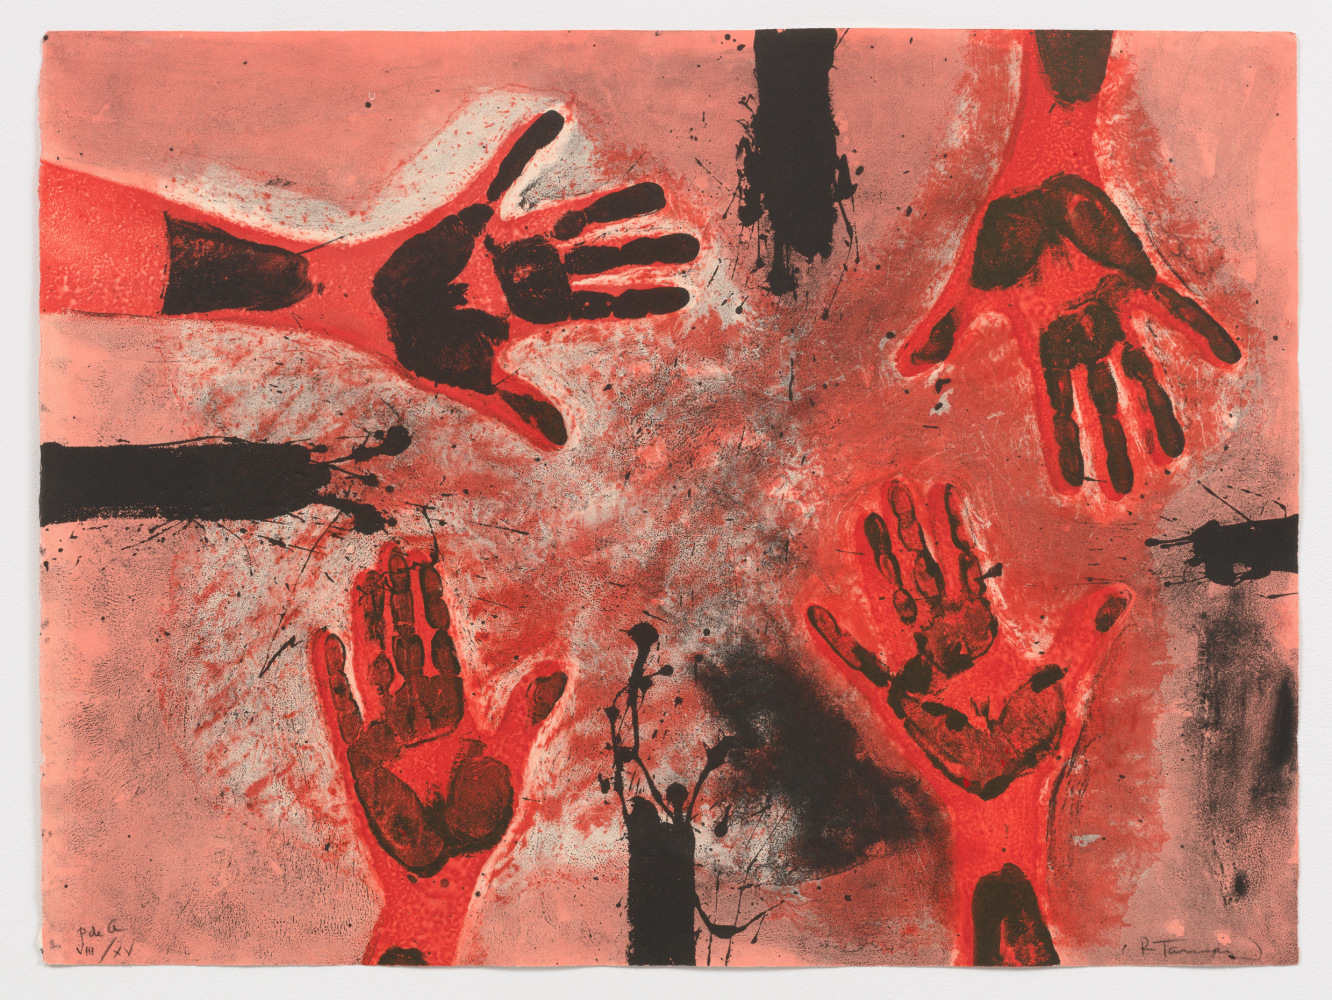 Several red and black hands facing up, with a muted red background and vibrant red and black splatters